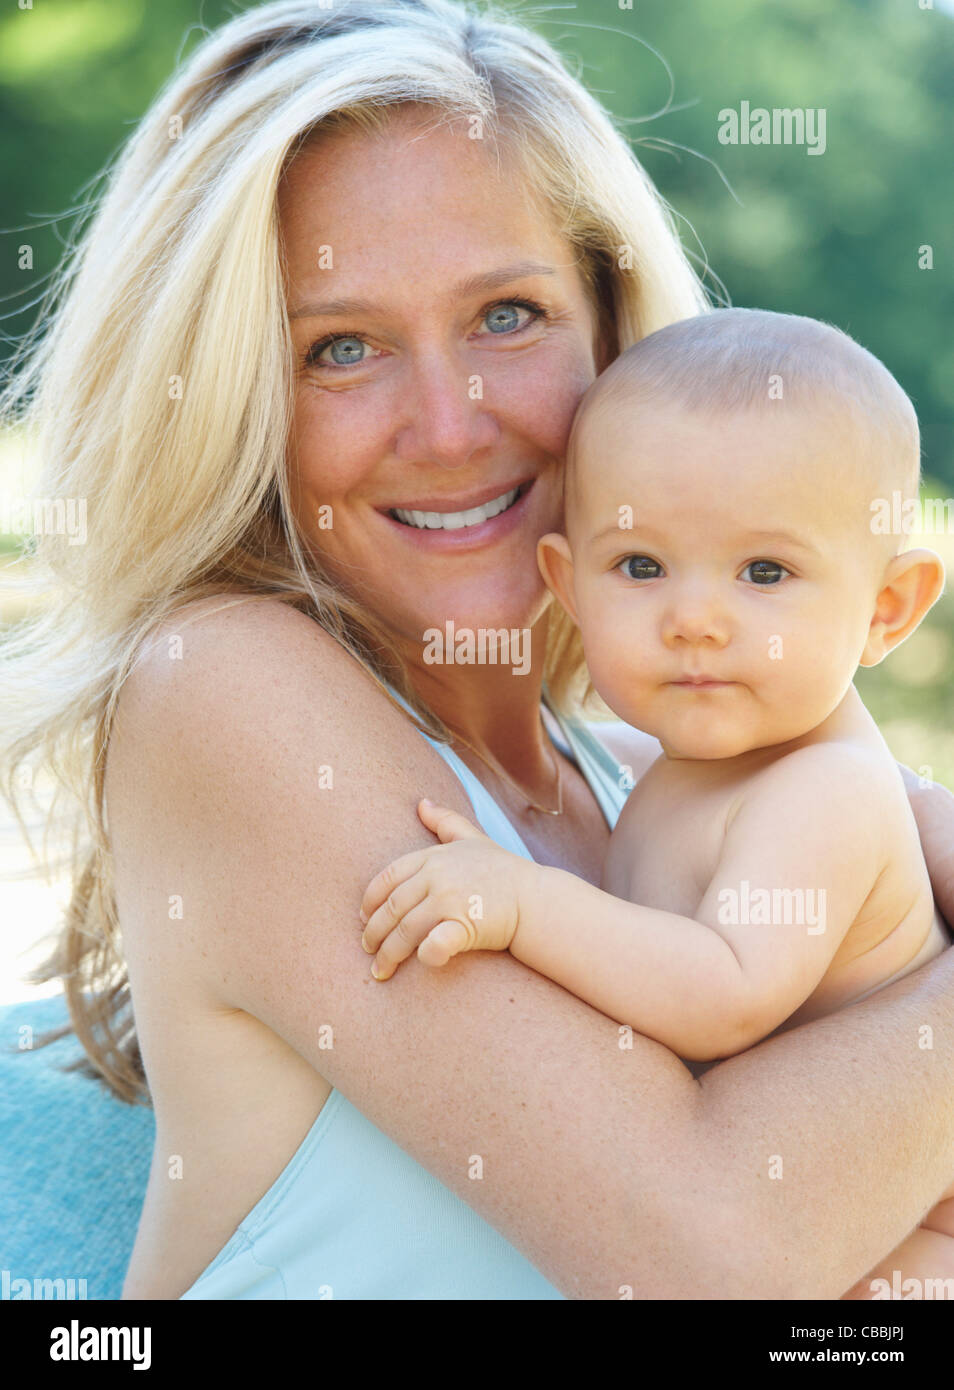 Smiling mother holding baby outdoors Stock Photo